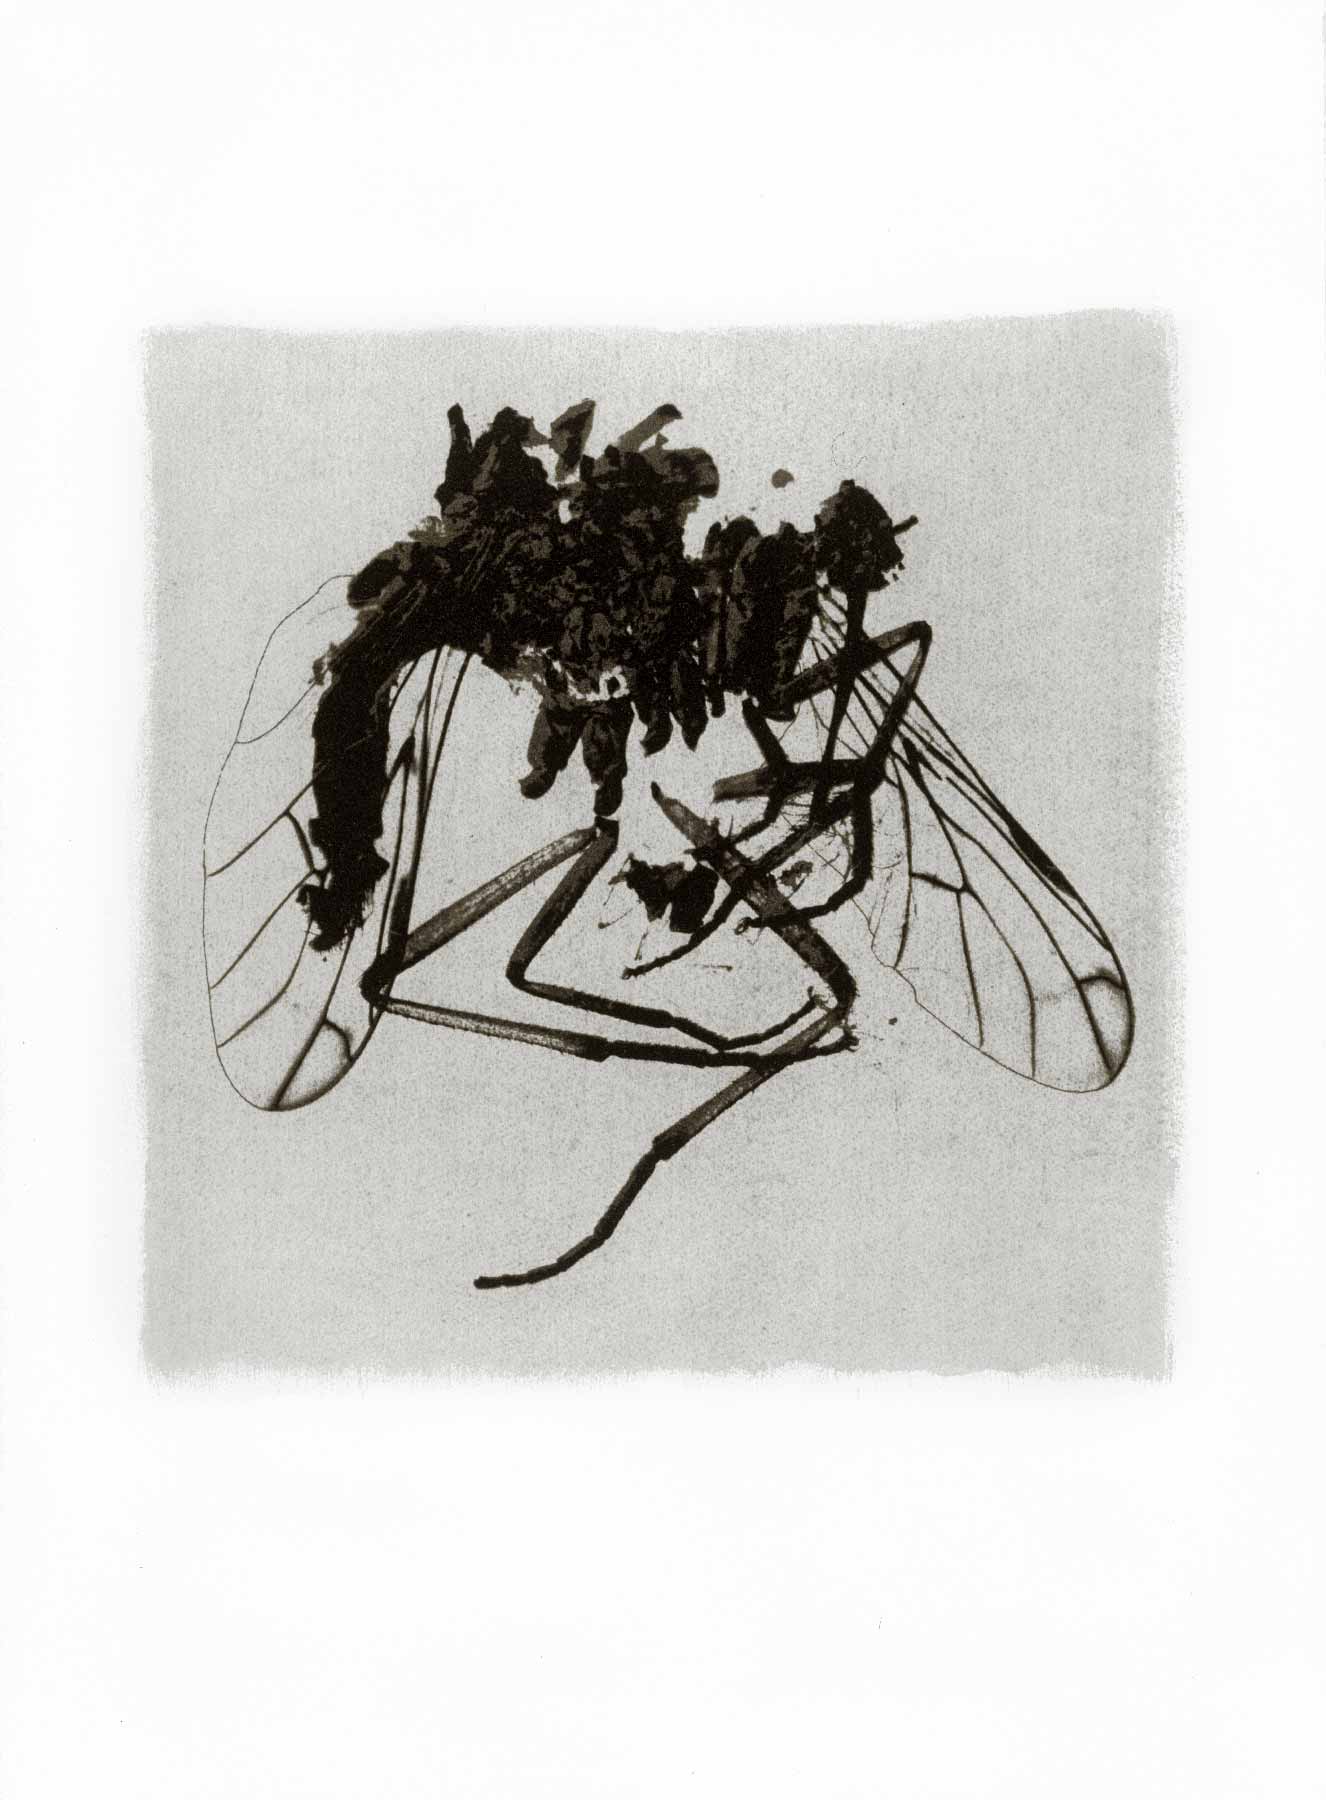 Gum bichromate insect - Crane fly 1996